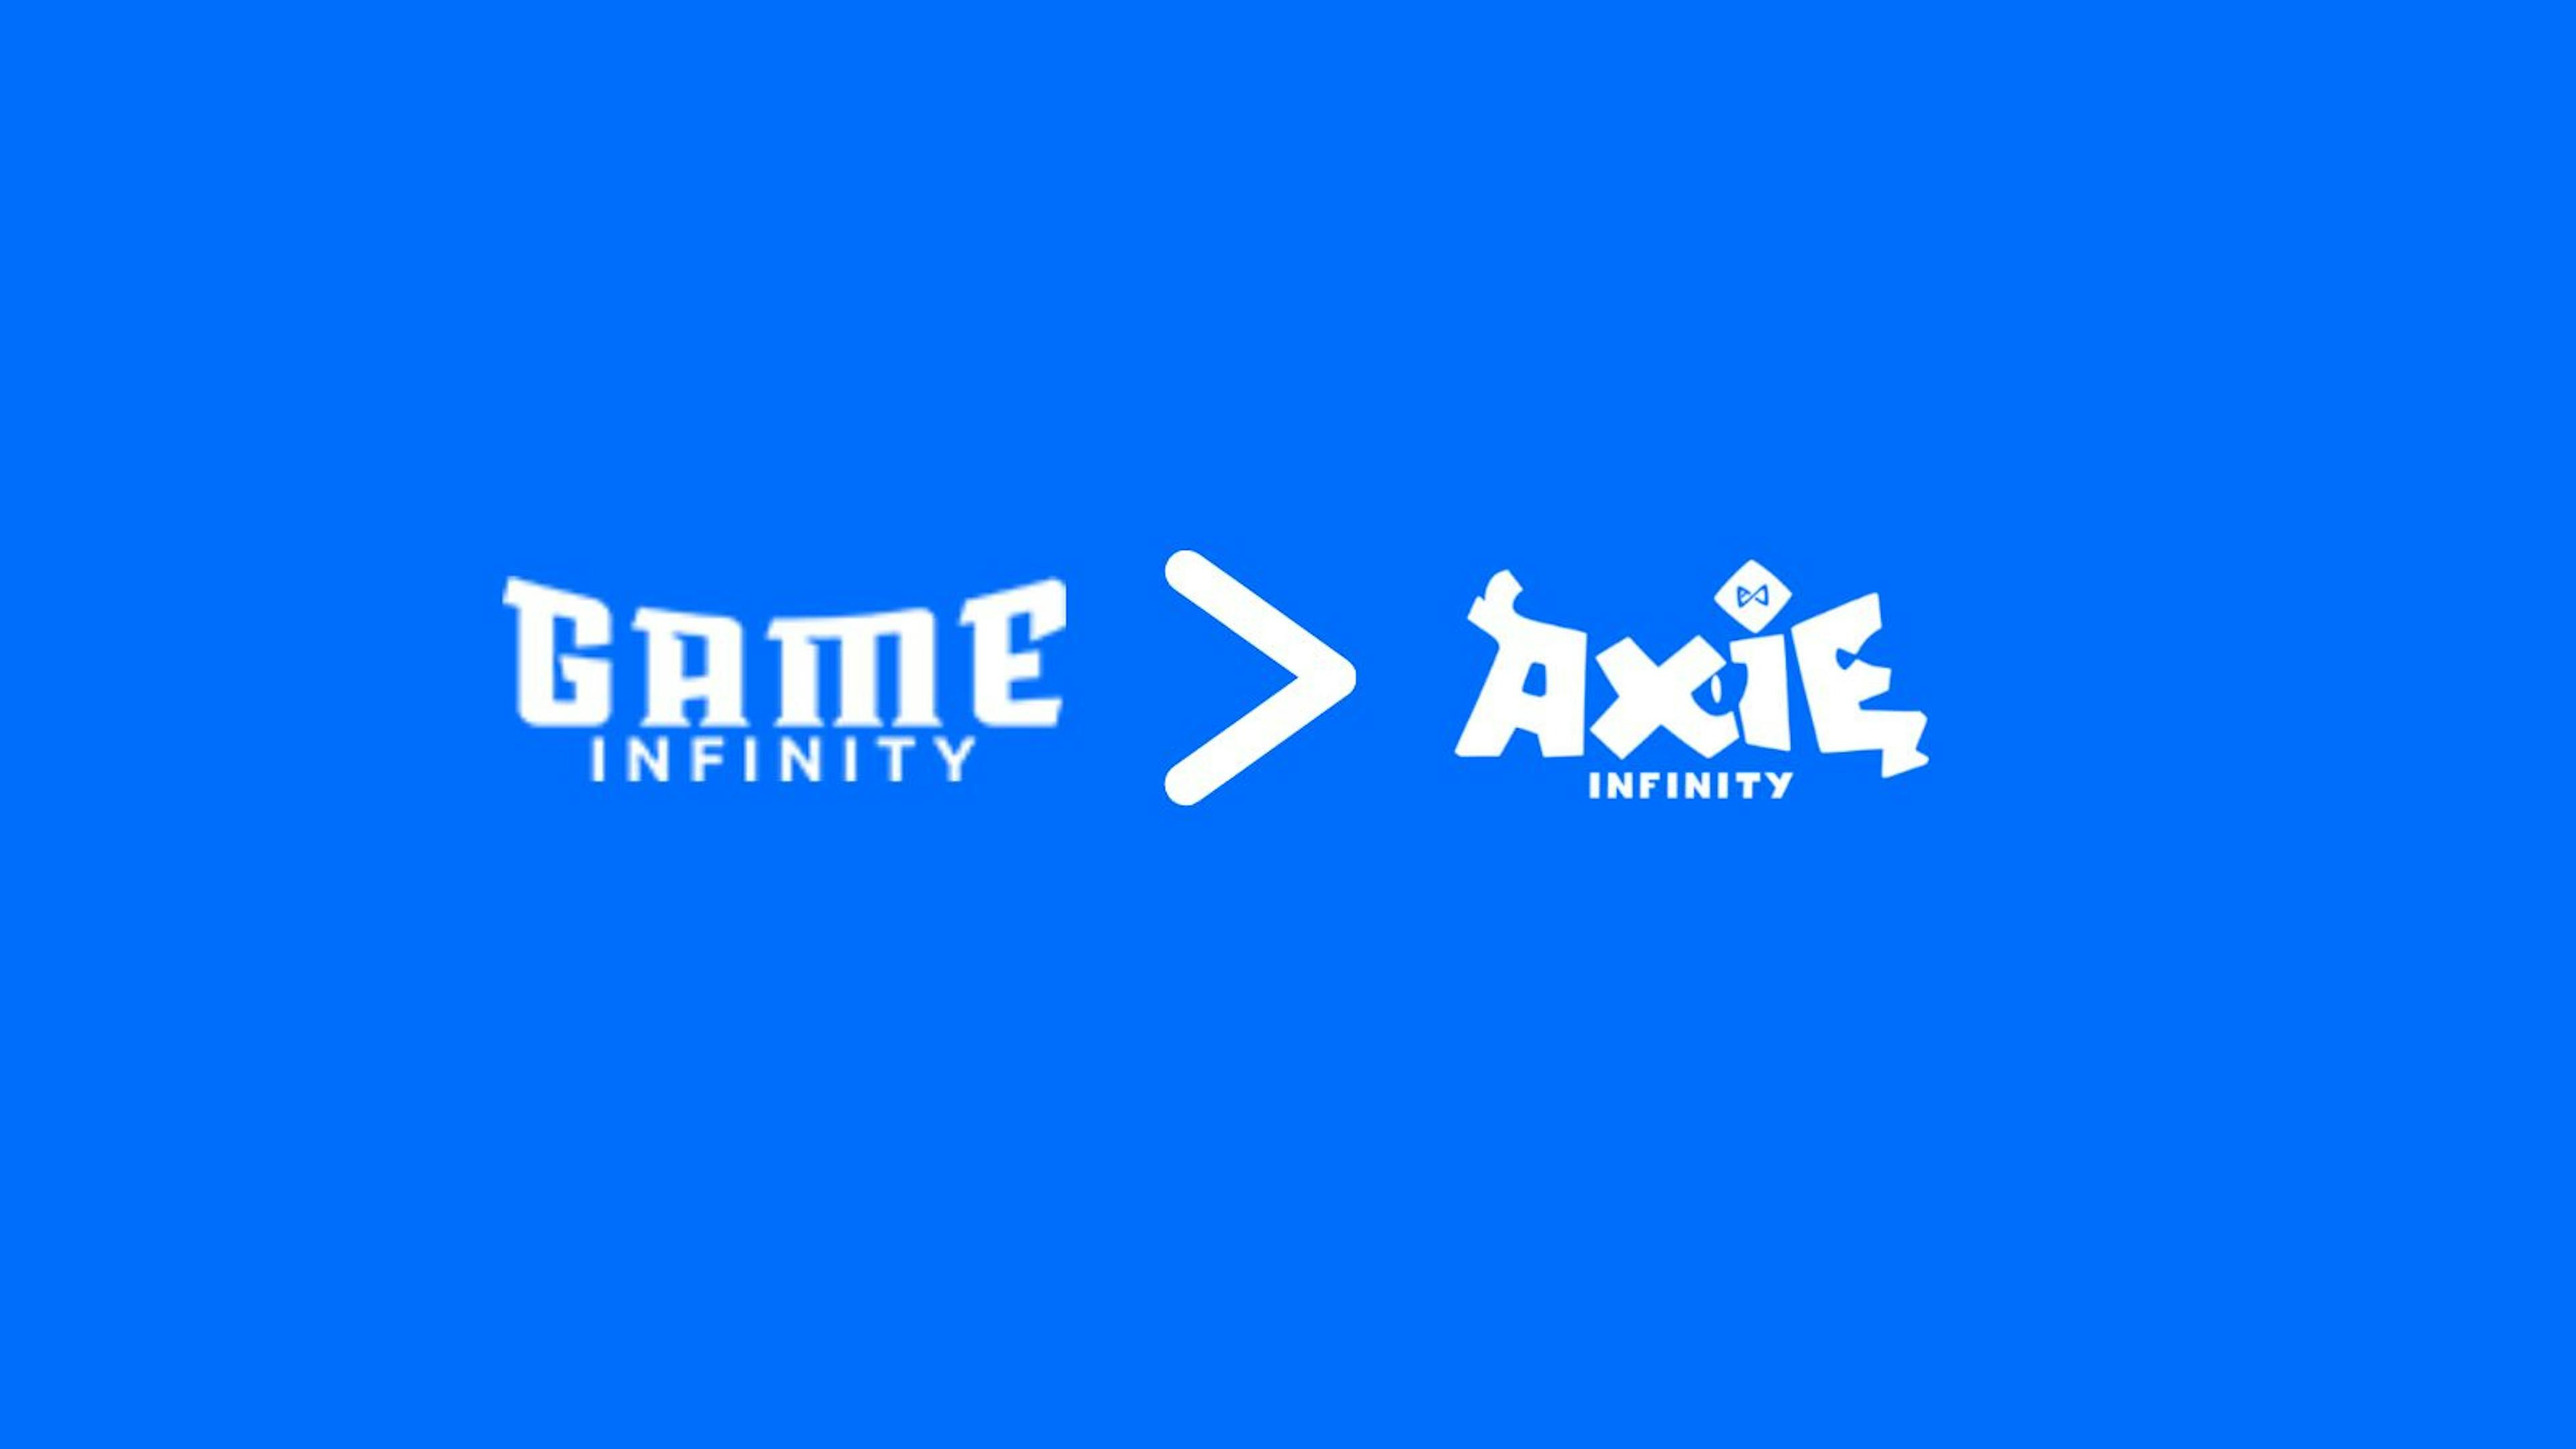 featured image - Comparing Axie Infinity and GameInfinity